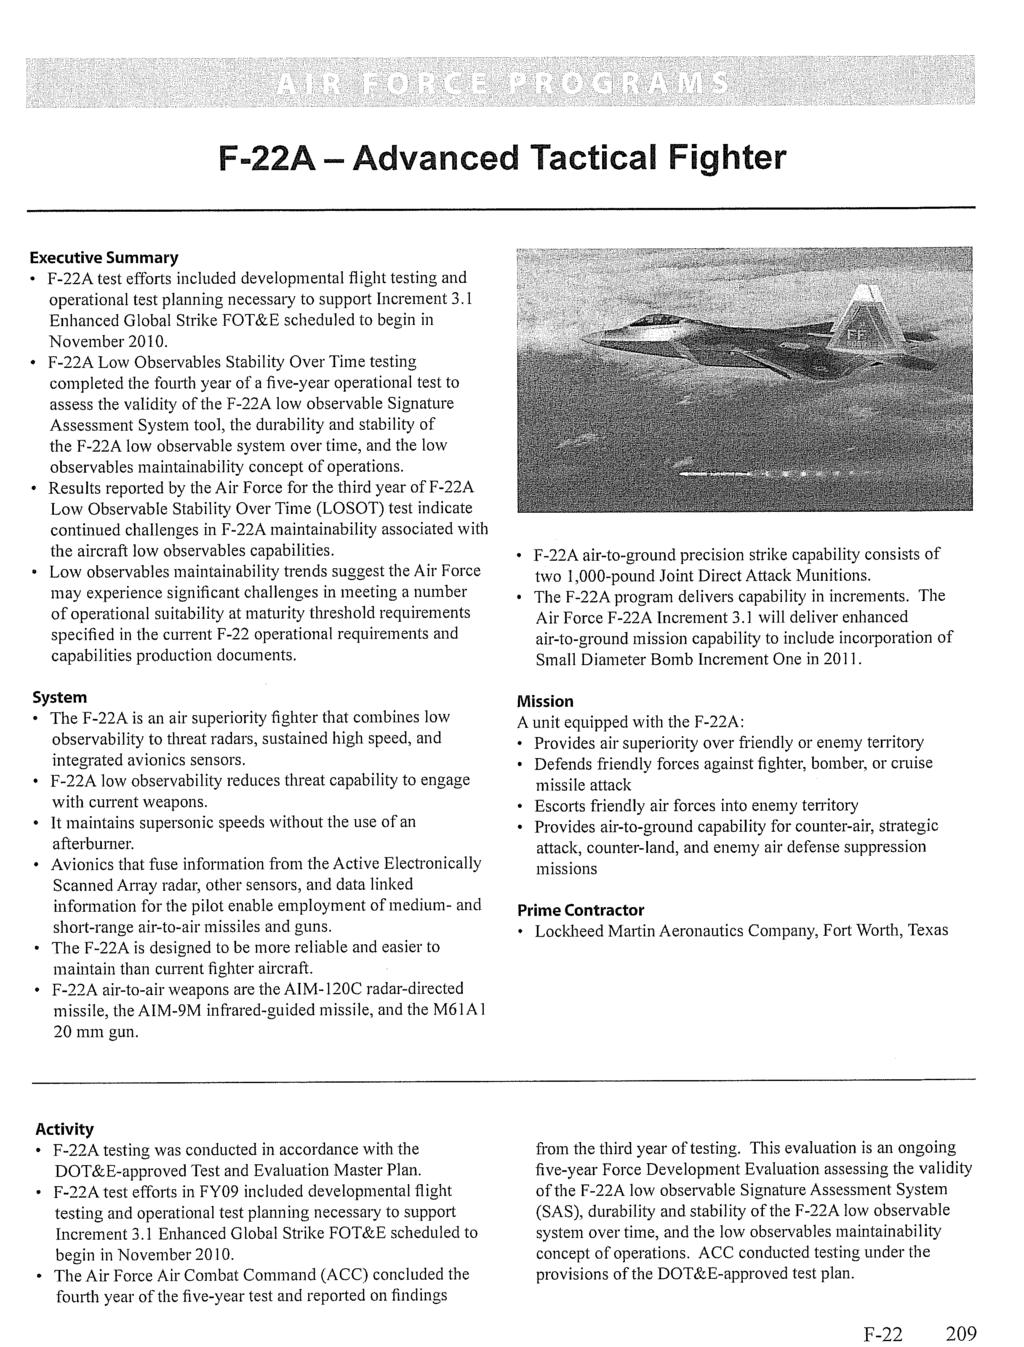 F-22 209 F-22A Advanced Tactical Fighter Executive Summary F-22A test efforts included developmental flight testing and operational test planning necessary to support Increment 3.